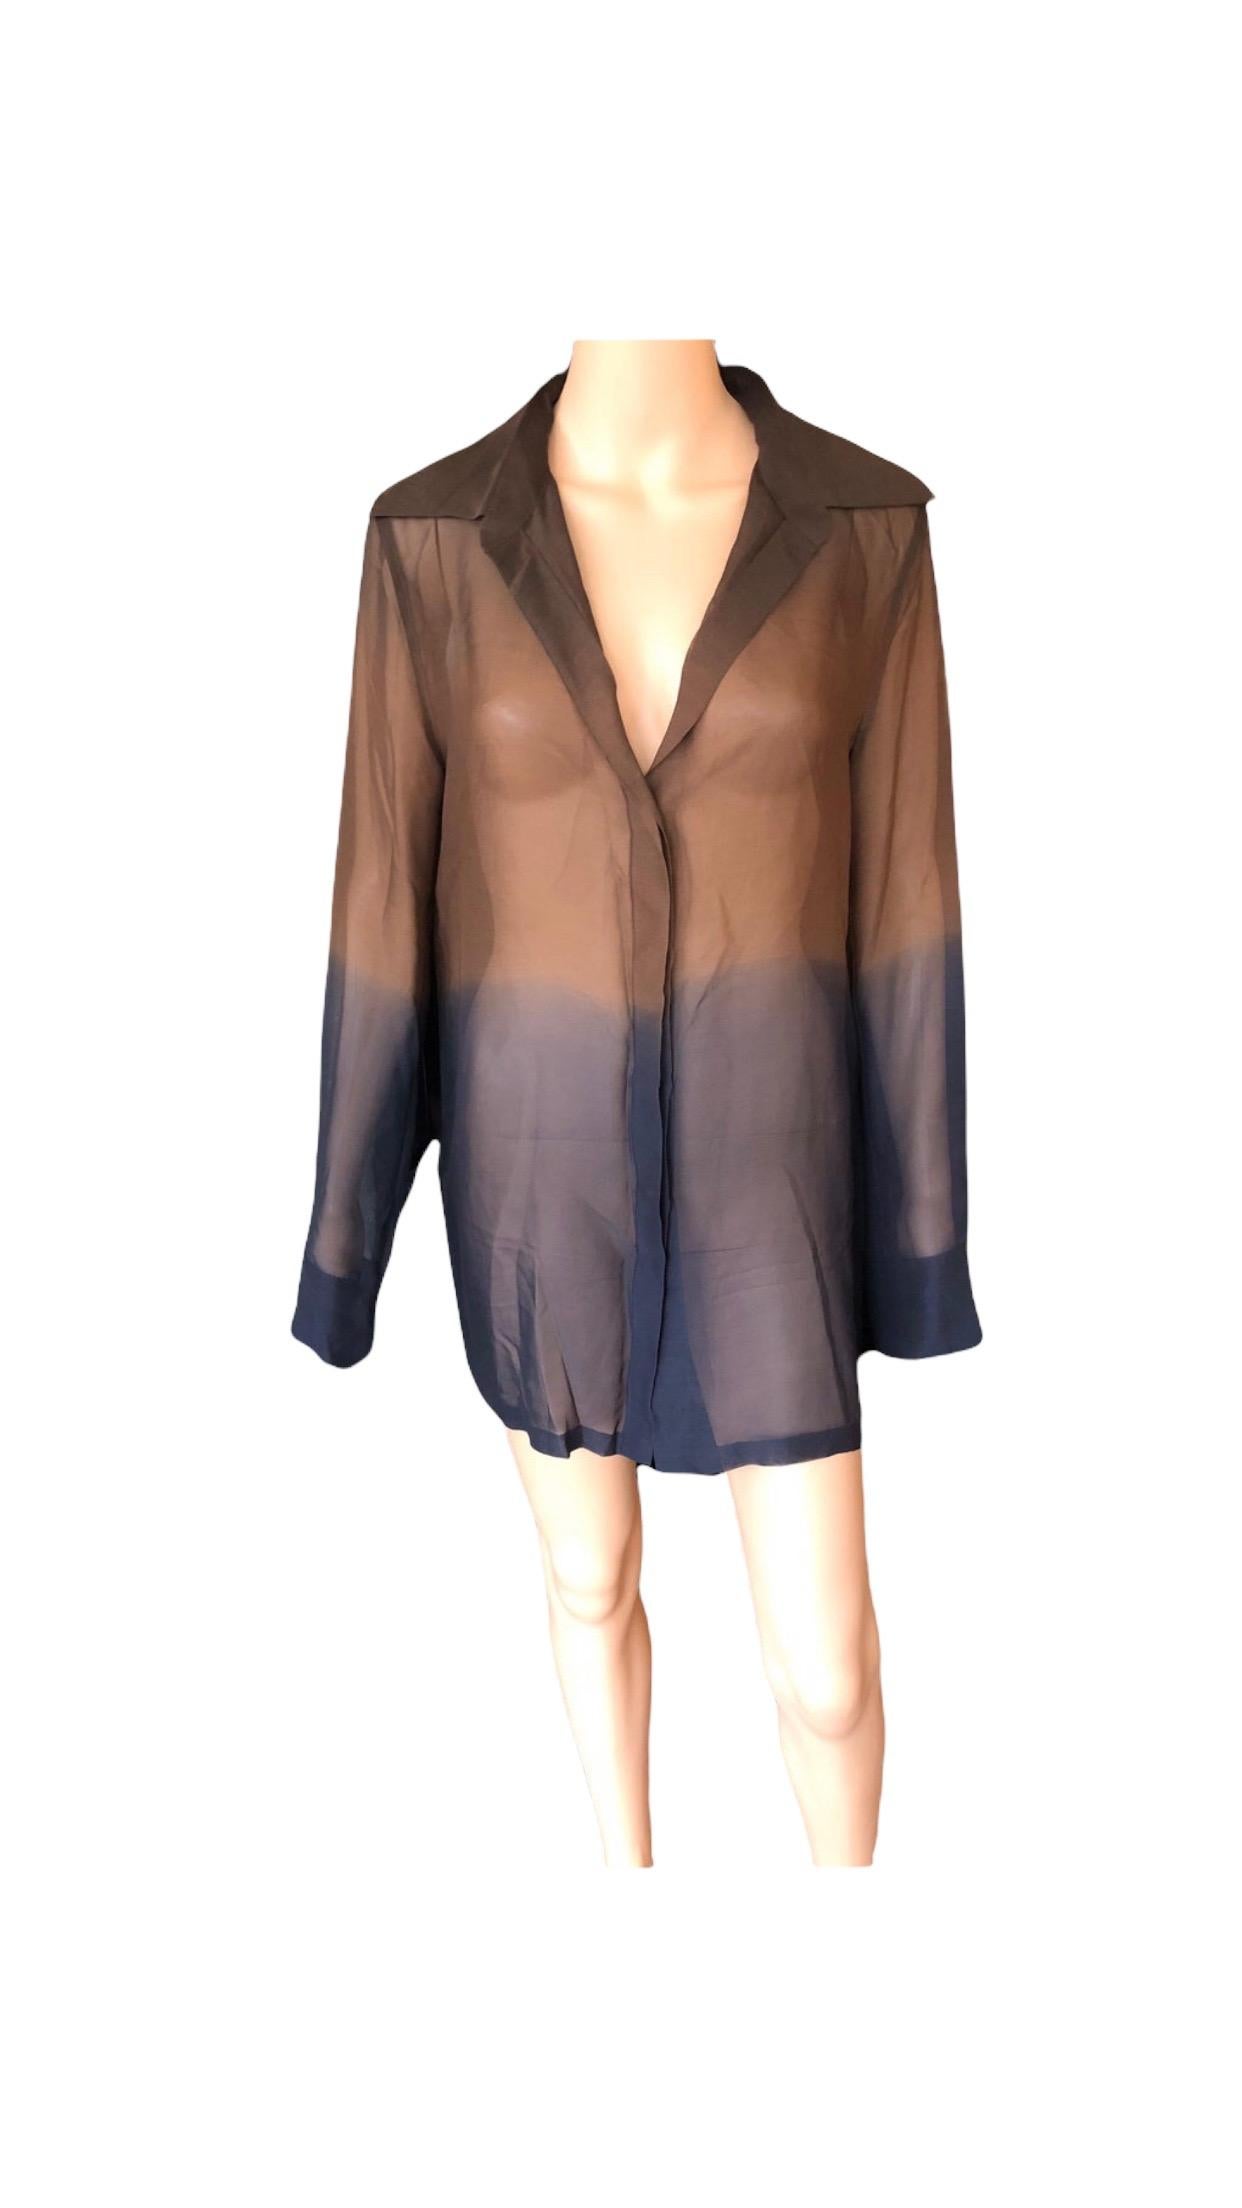 Gucci by Tom Ford 1997 Vintage Sheer Brown & Blue Ombre Silk Tunic Top For Sale 7